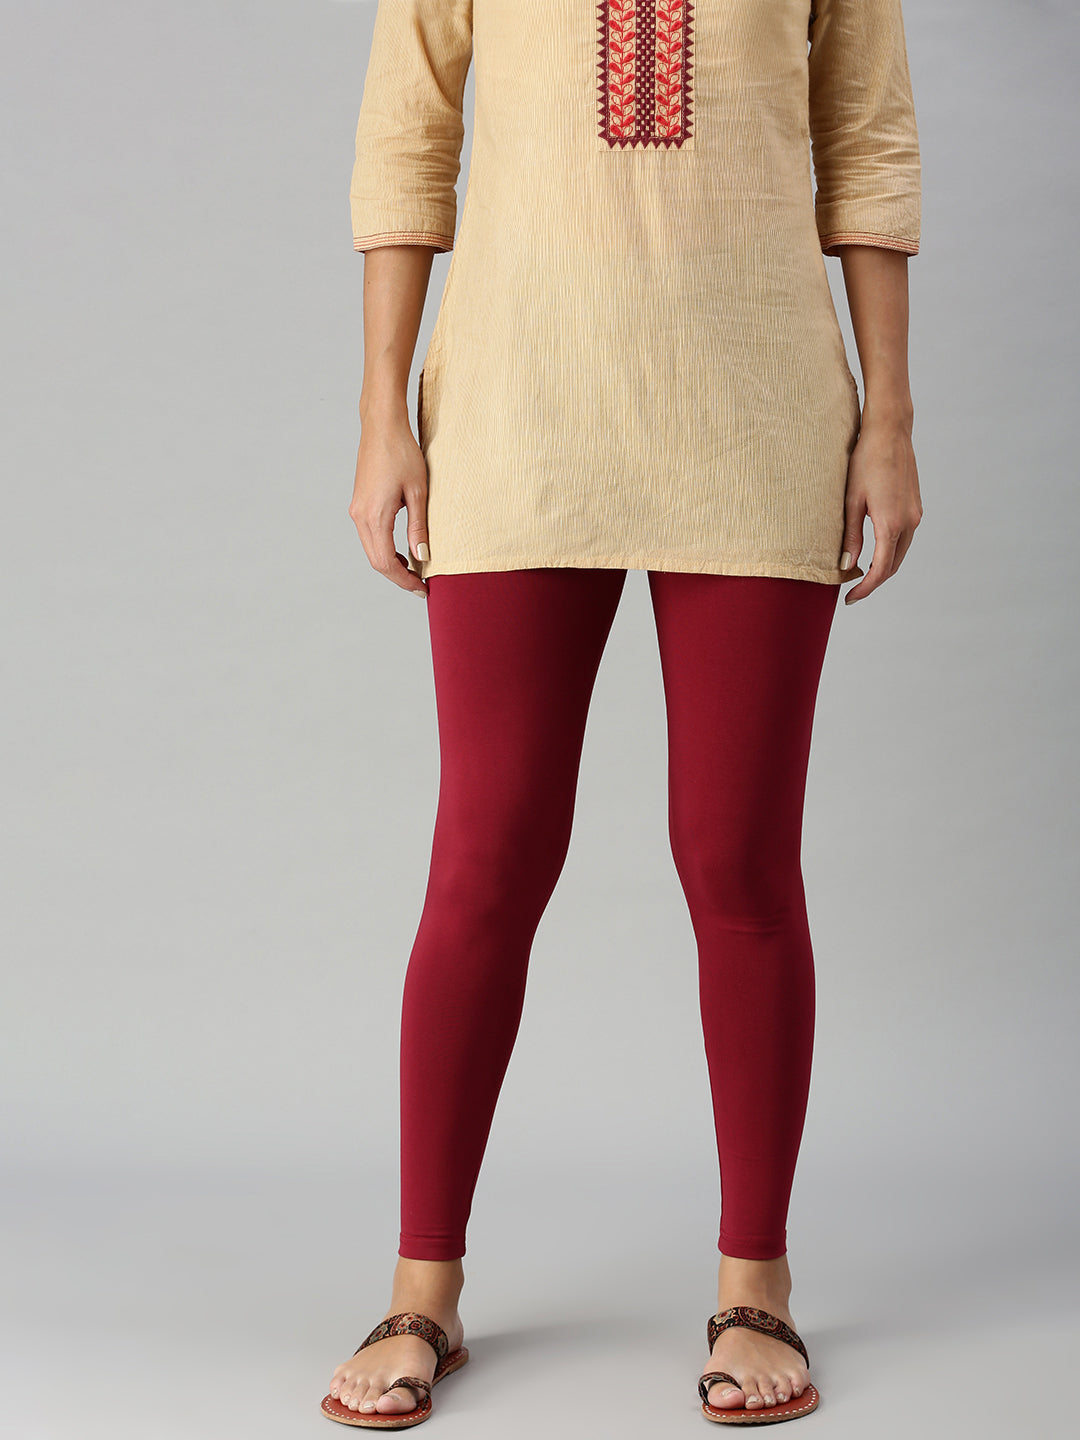 Wheat Cotton Ankle Length Legging at Soch